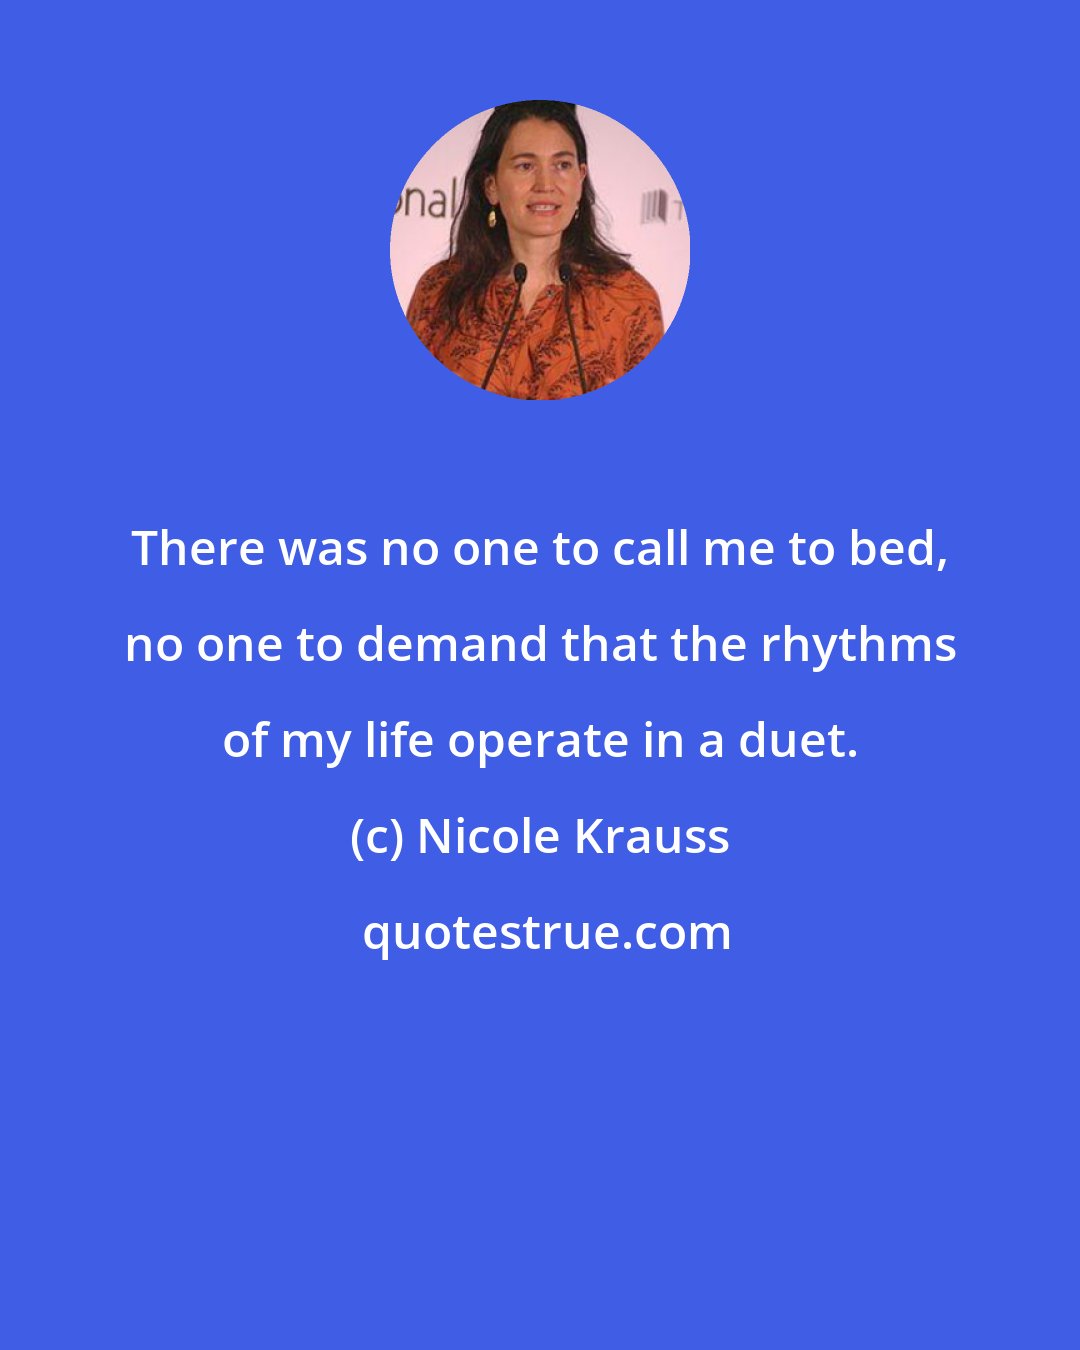 Nicole Krauss: There was no one to call me to bed, no one to demand that the rhythms of my life operate in a duet.